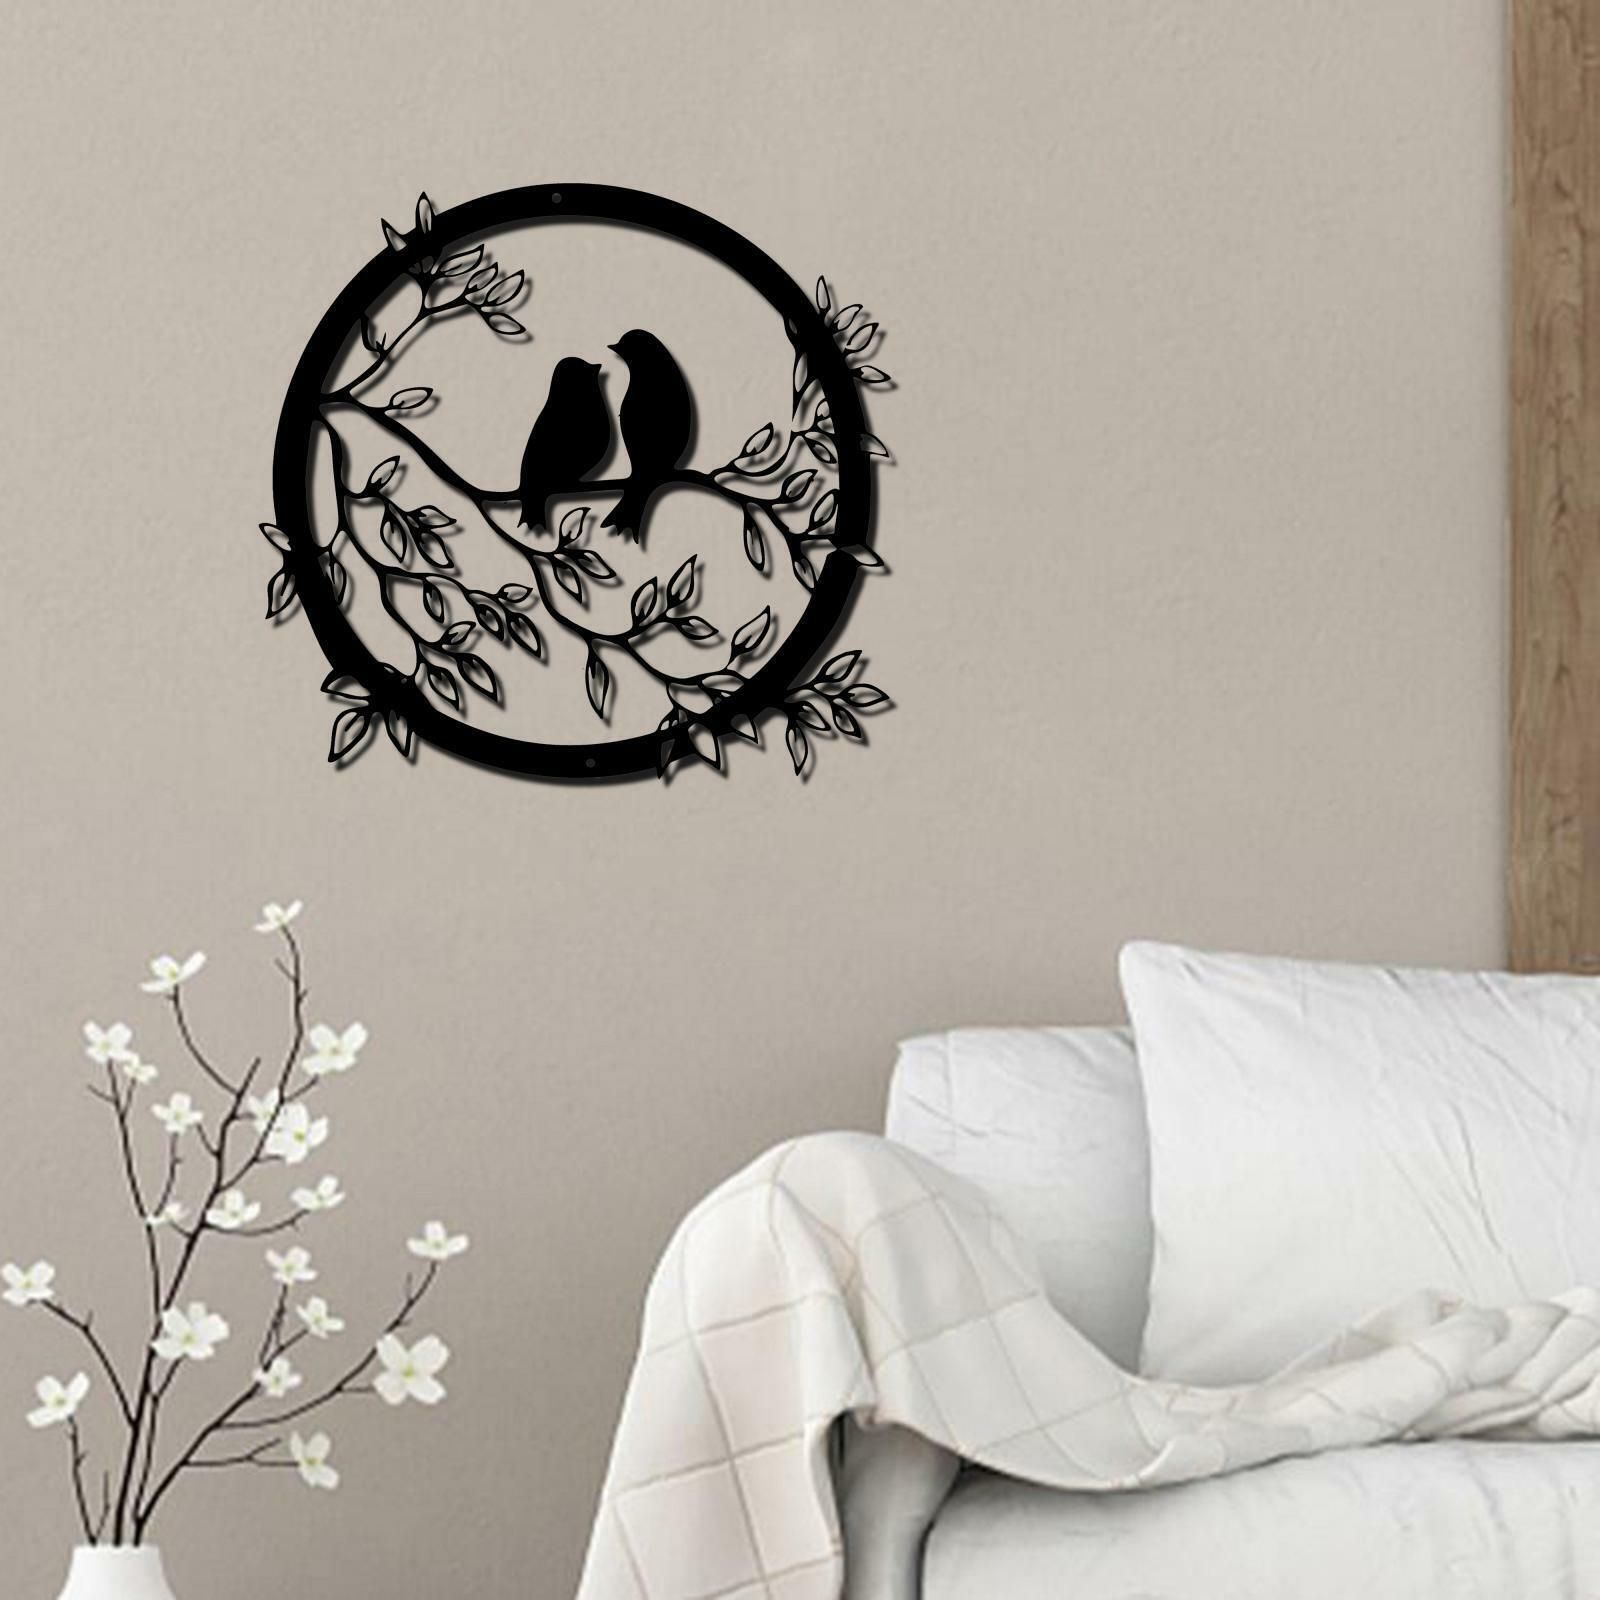 Round Metal Wall Art Decor Bird Silhouette Hanging For Balcony Indoor Decor  | Ebay Throughout Silhouette Bird Wall Art (View 14 of 15)